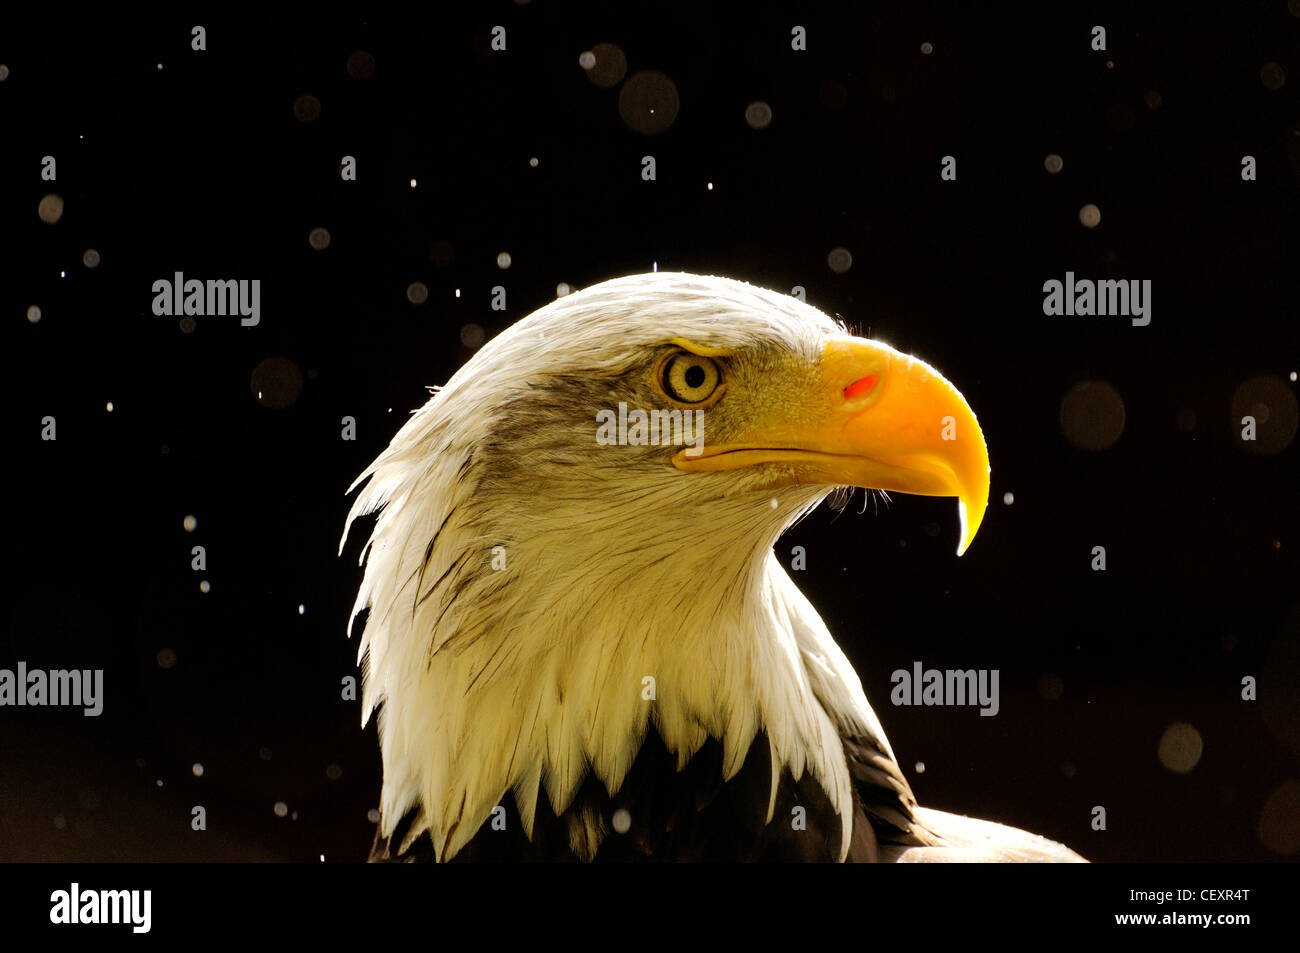 A portrait of an American Bald Eagle in the rain Stock Photo